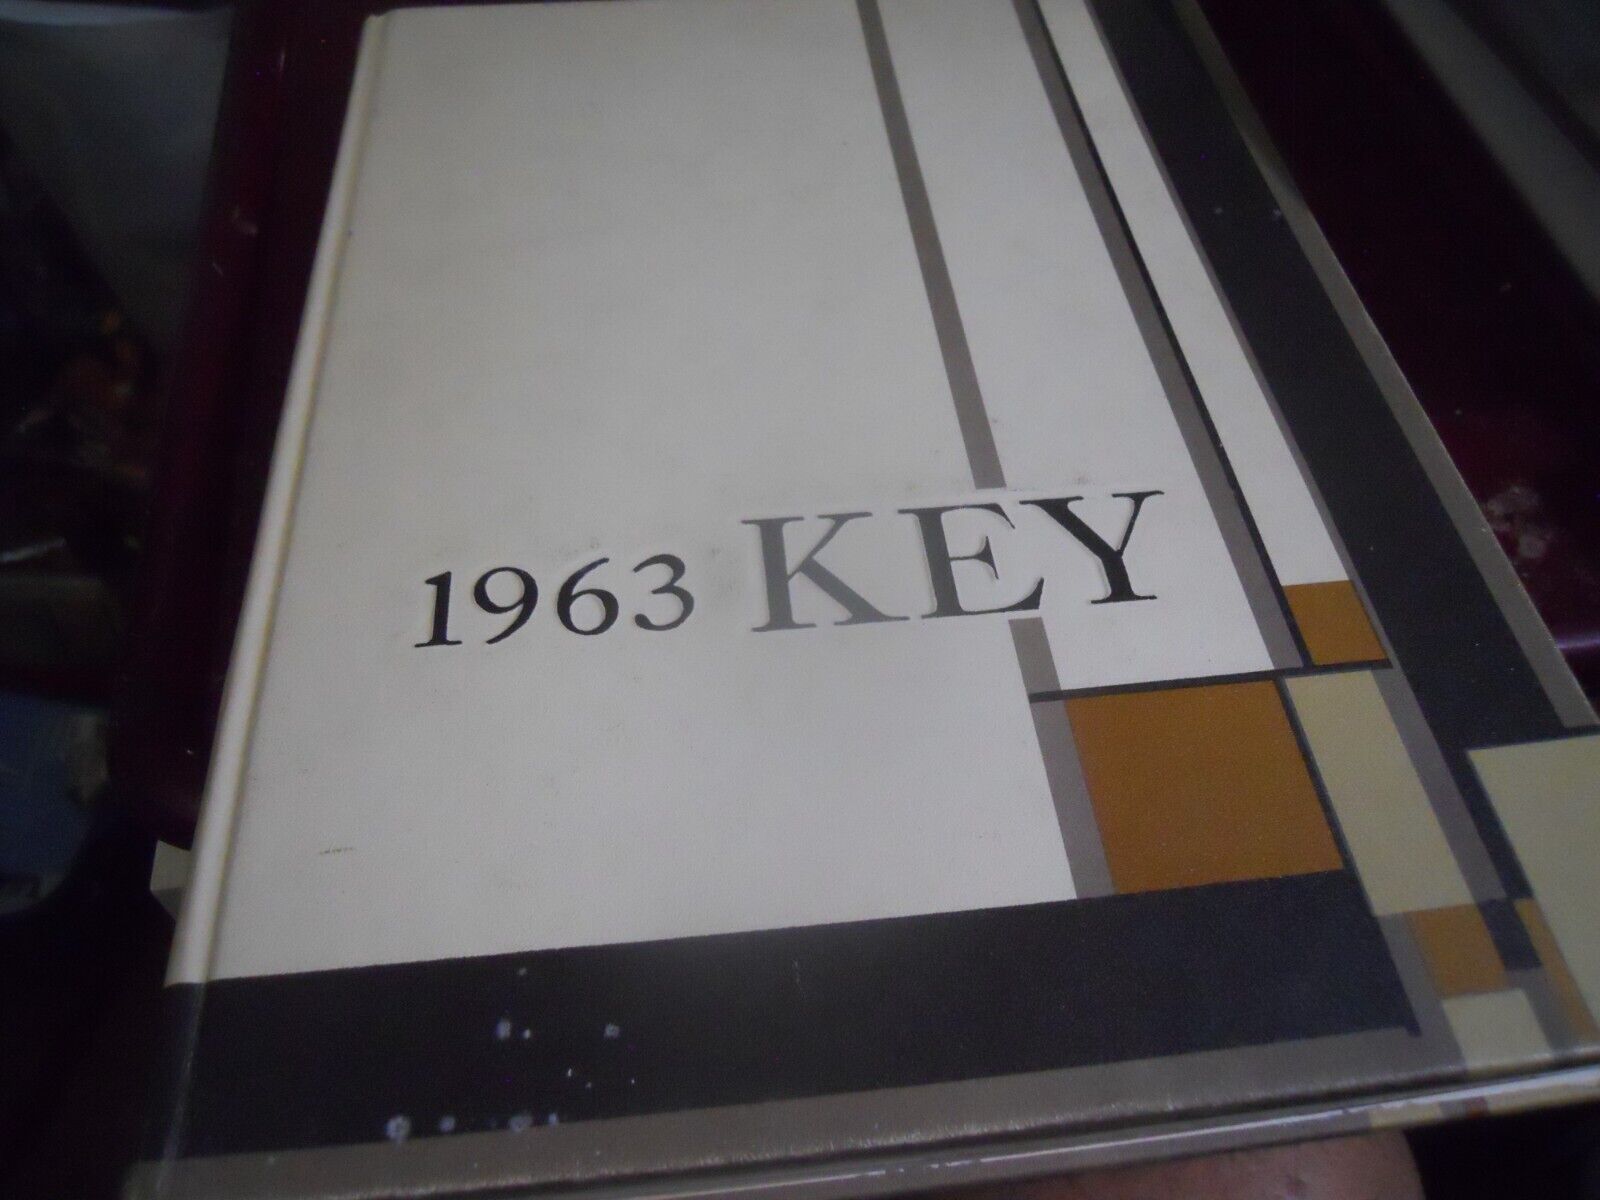  BOWLING GREEN STATE UNIVERSITY SCHOOL COLLEGE YEARBOOK 1963 OHIO THE KEY 